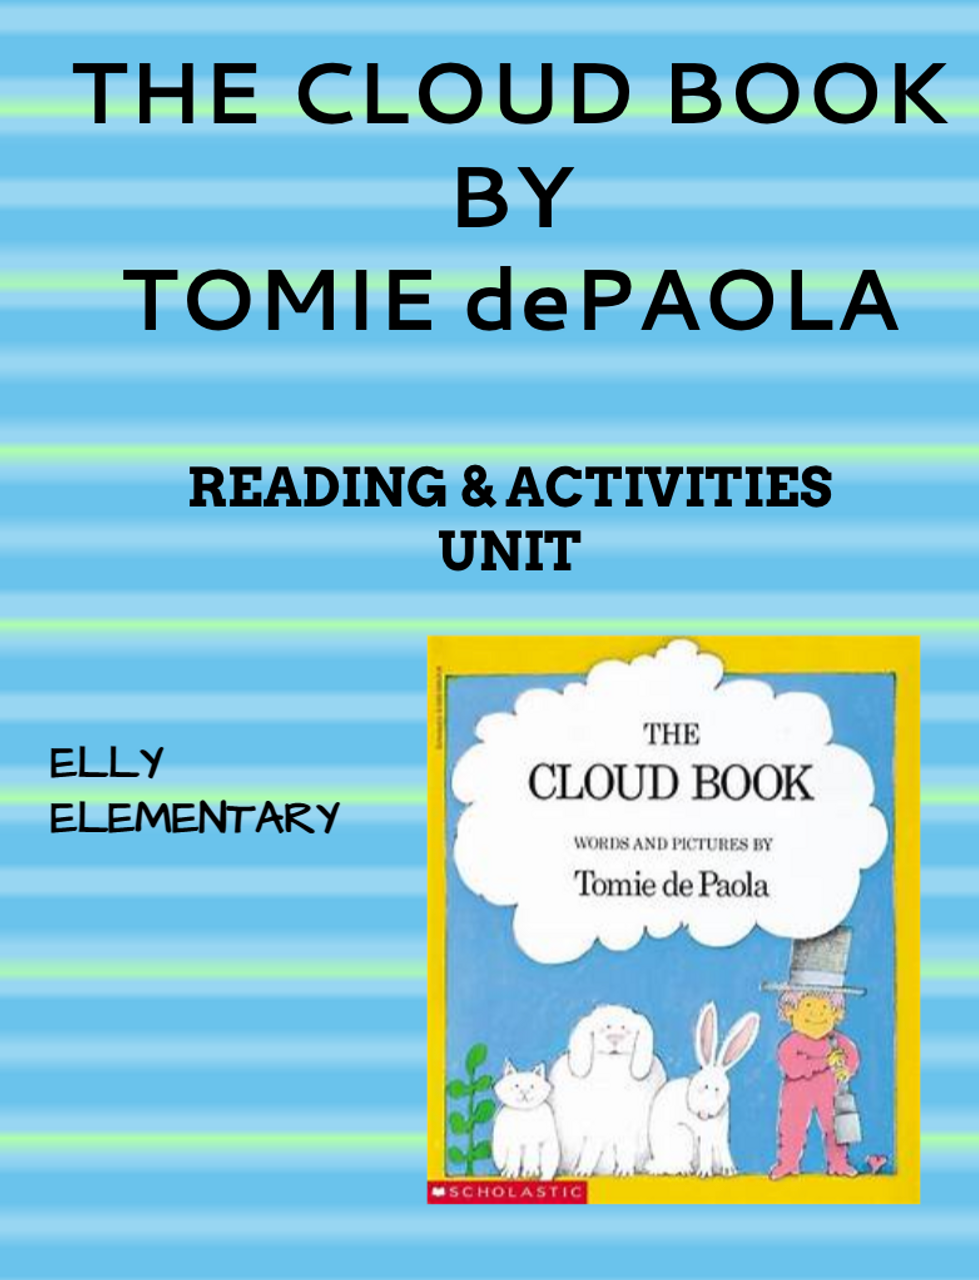 THE CLOUD BOOK BY TOMIE dePAOLA READING & ACTIVITY PACK